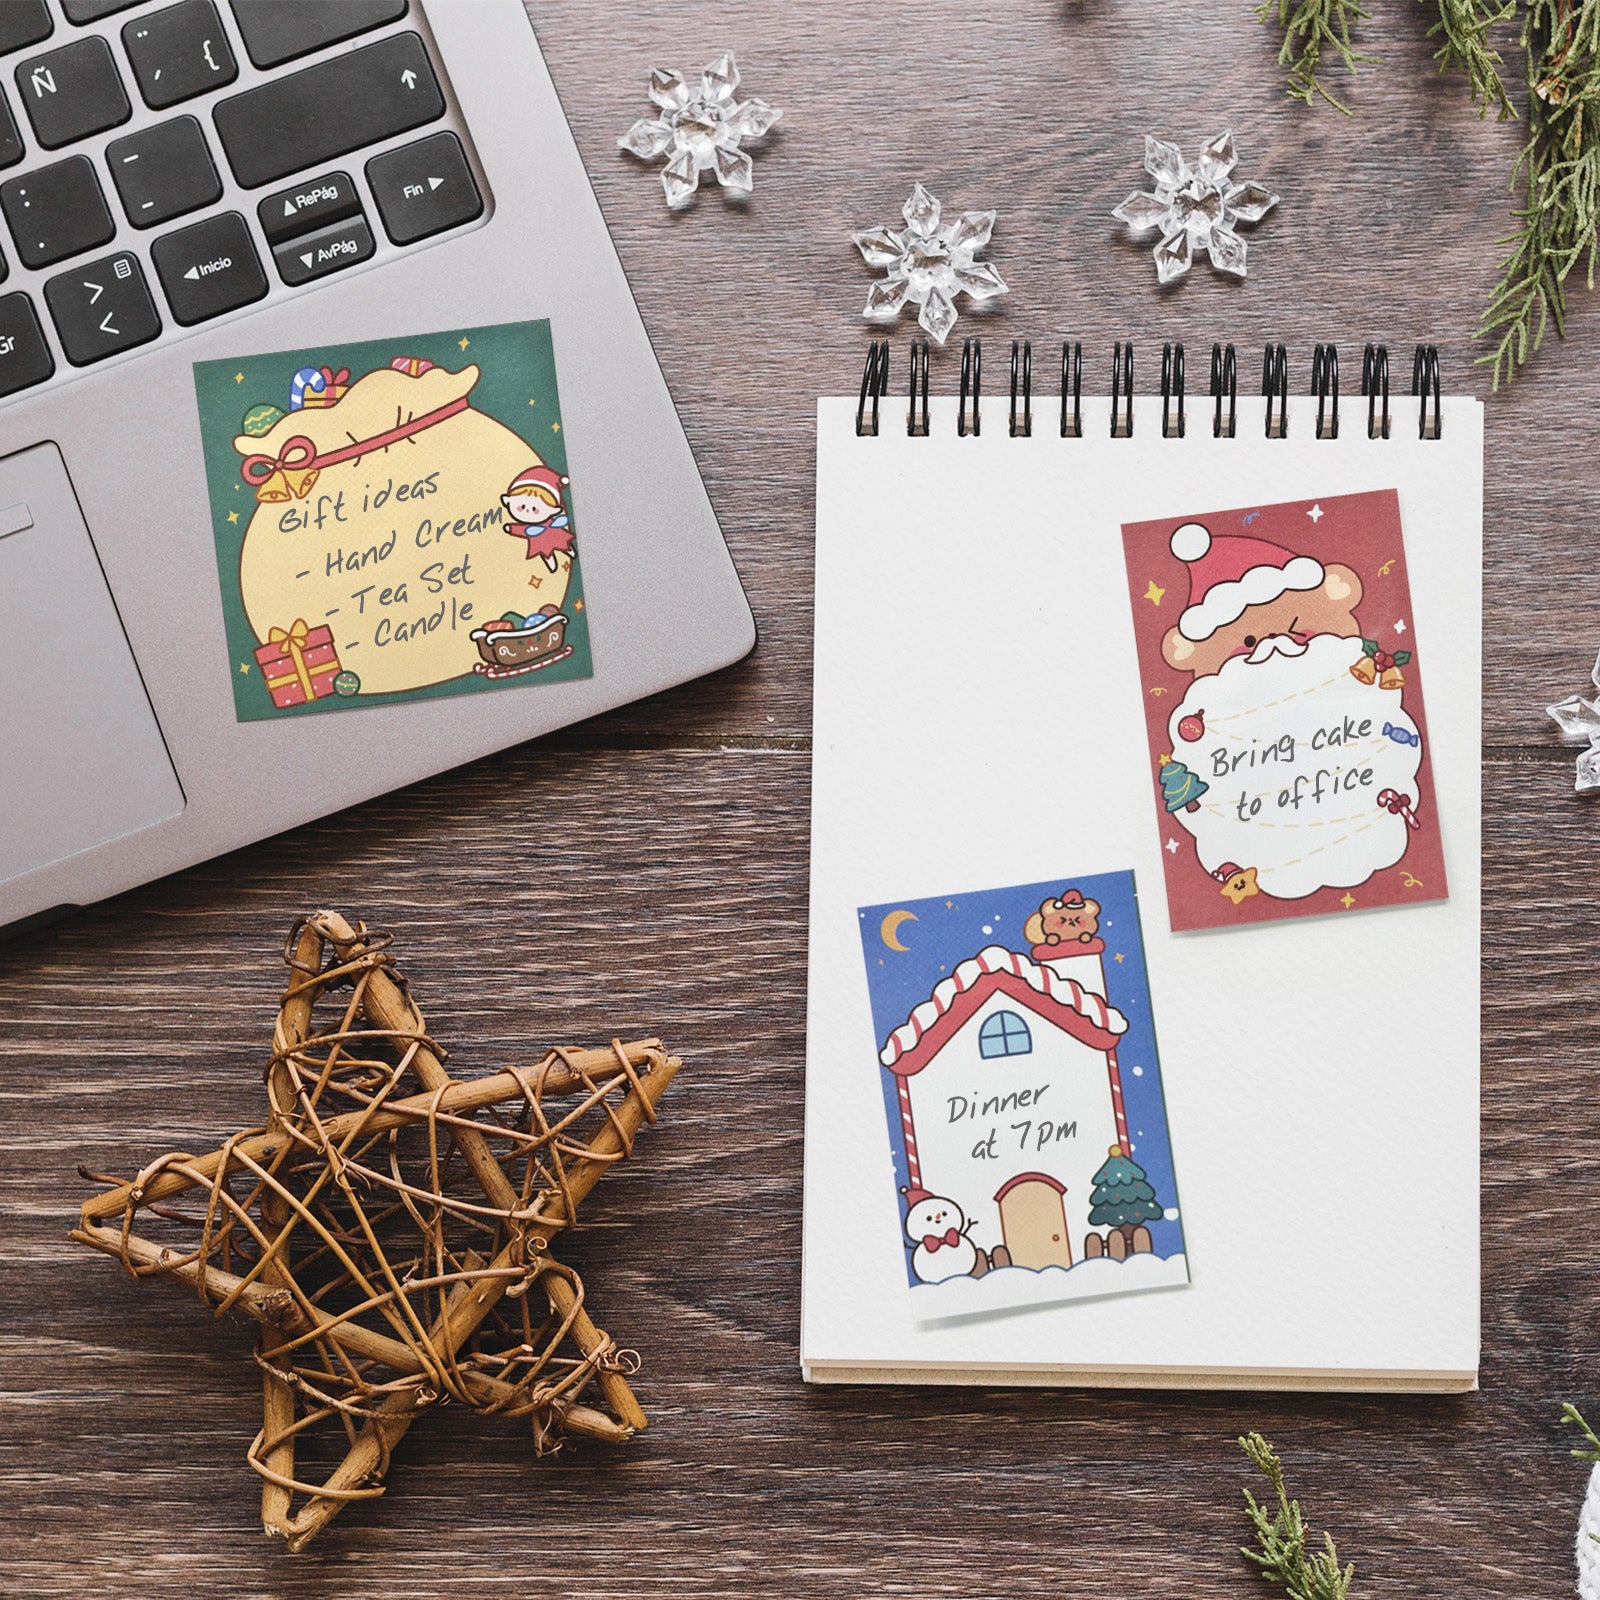 Wrapables Happy Holidays Christmas Sticky Notes, Adhesive Winter Holiday Memo Notepads for Home, Office, Work